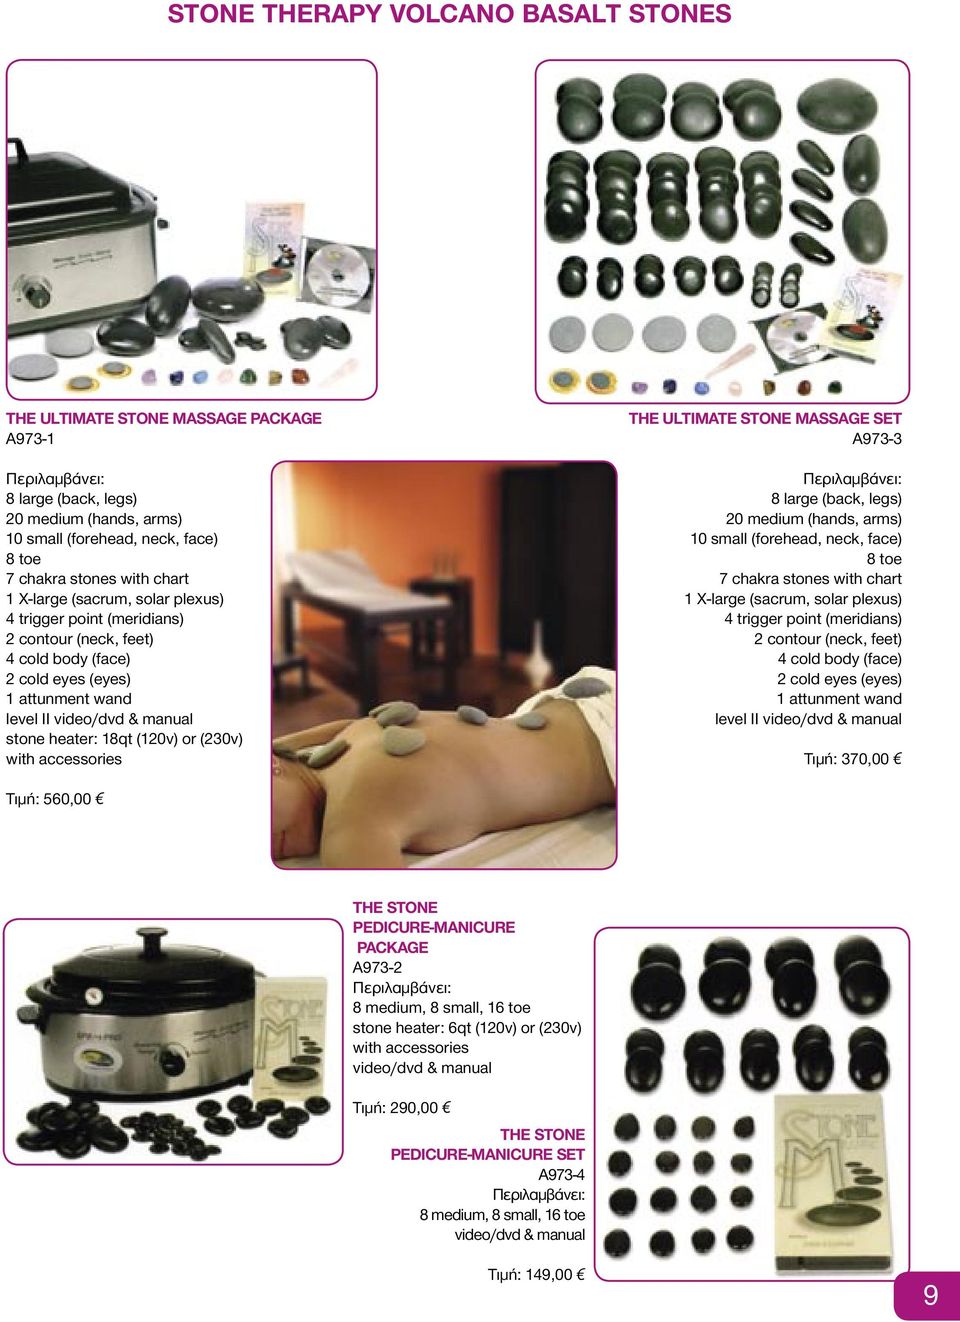 or (230v) with accessories THE ULTIMATE STONE MASSAGE SET Α973-3 Περιλαµβάνει: 8 large (back, legs) 20 medium (hands, arms) 10 small (forehead, neck, face) 8 toe 7 chakra stones with chart 1 X-large